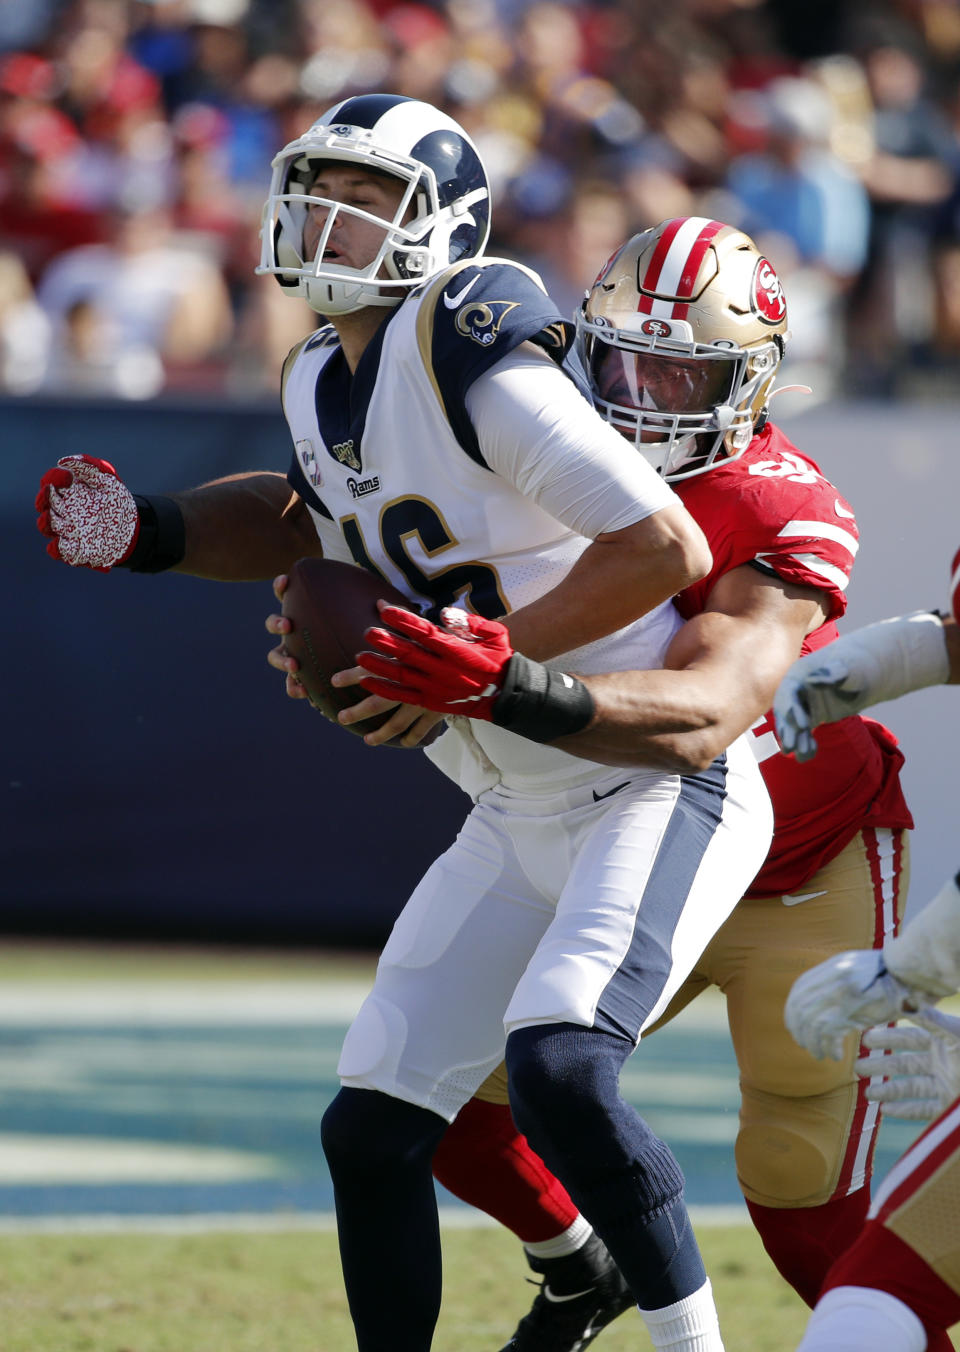 Los Angeles Rams quarterback Jared Goff (16) is sacked by San Francisco 49ers defensive end Solomon Thomas during the second half of an NFL football game Sunday, Oct. 13, 2019, in Los Angeles. (AP Photo/John Locher)